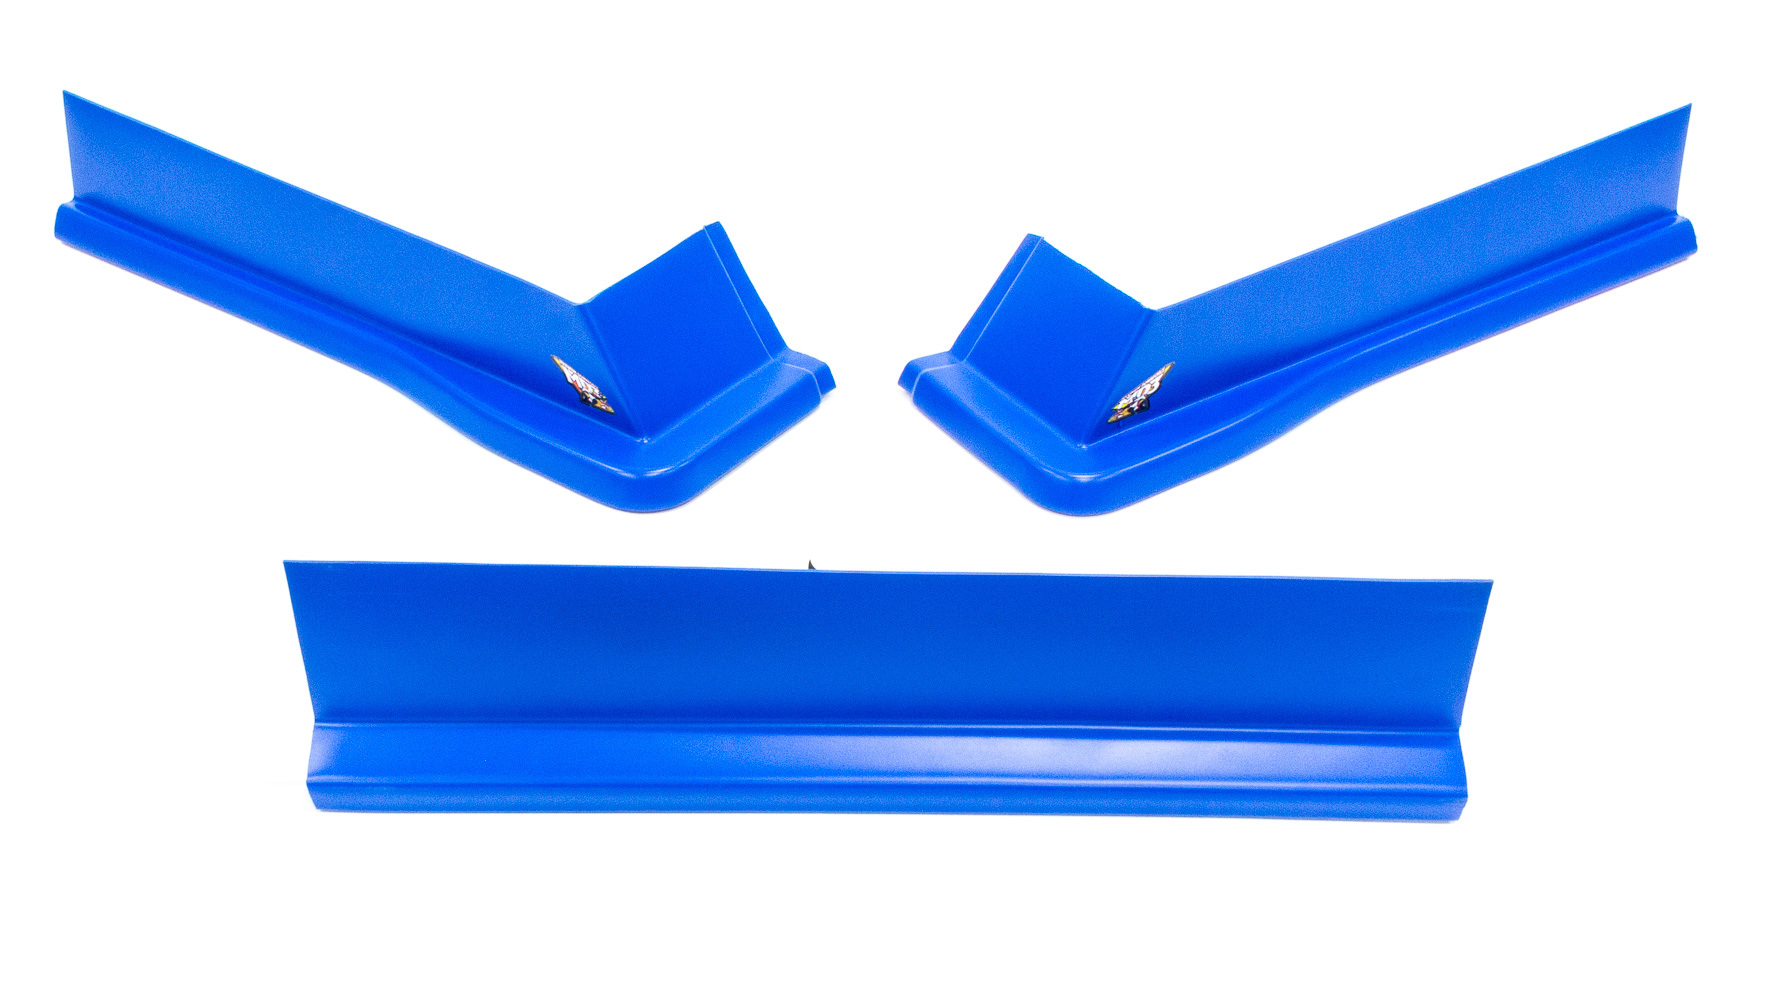 Air Valance - MD3 - 3 Piece - Molded Plastic - Chevron Blue - Modified - Kit